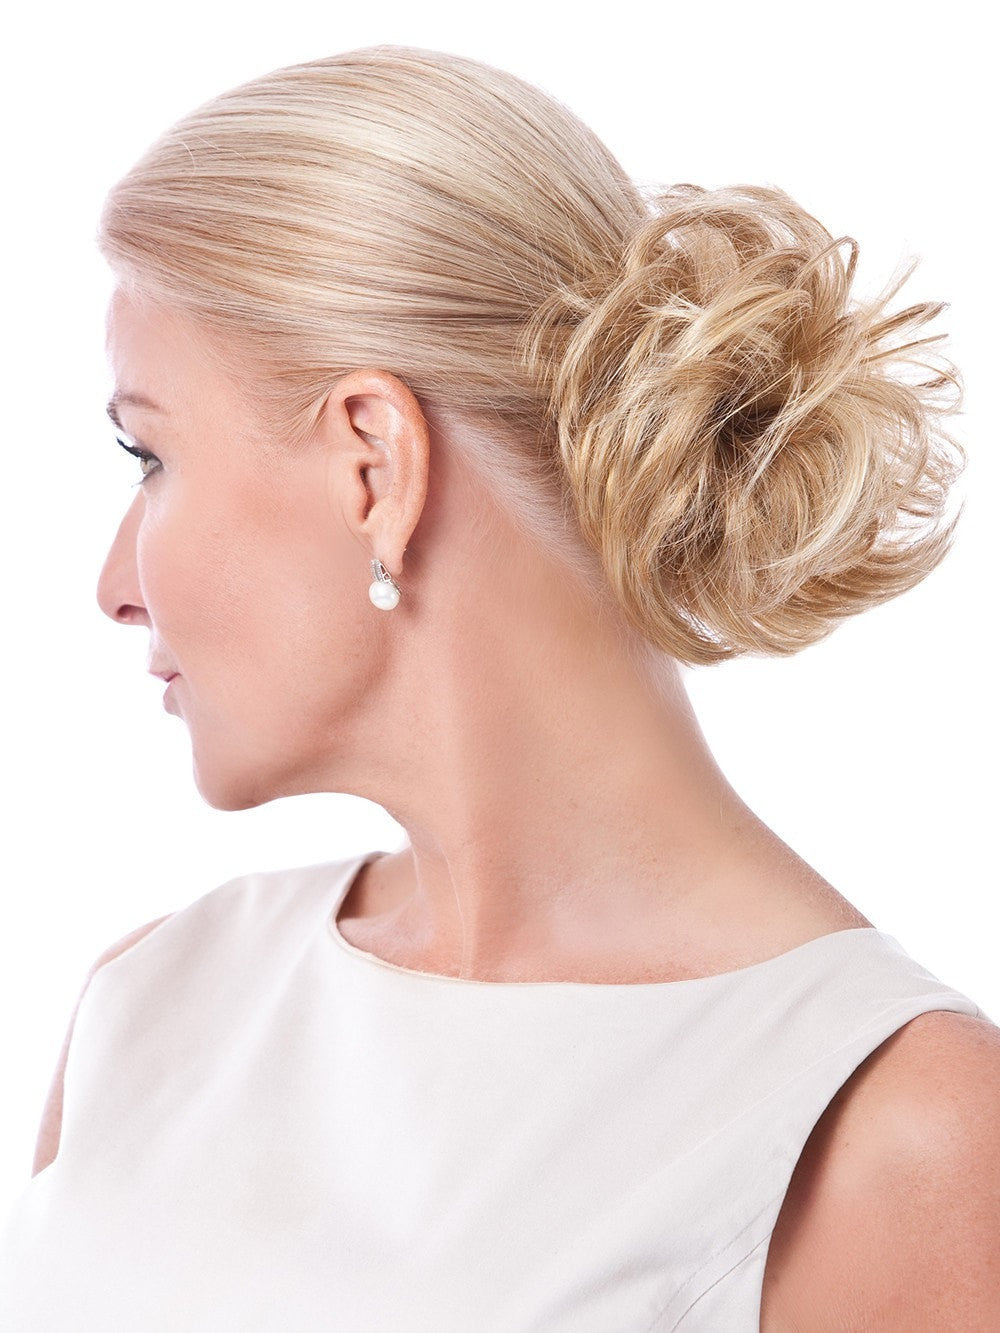 Just twist & wrap around your own short or long ponytail, and you are out-the-door in seconds